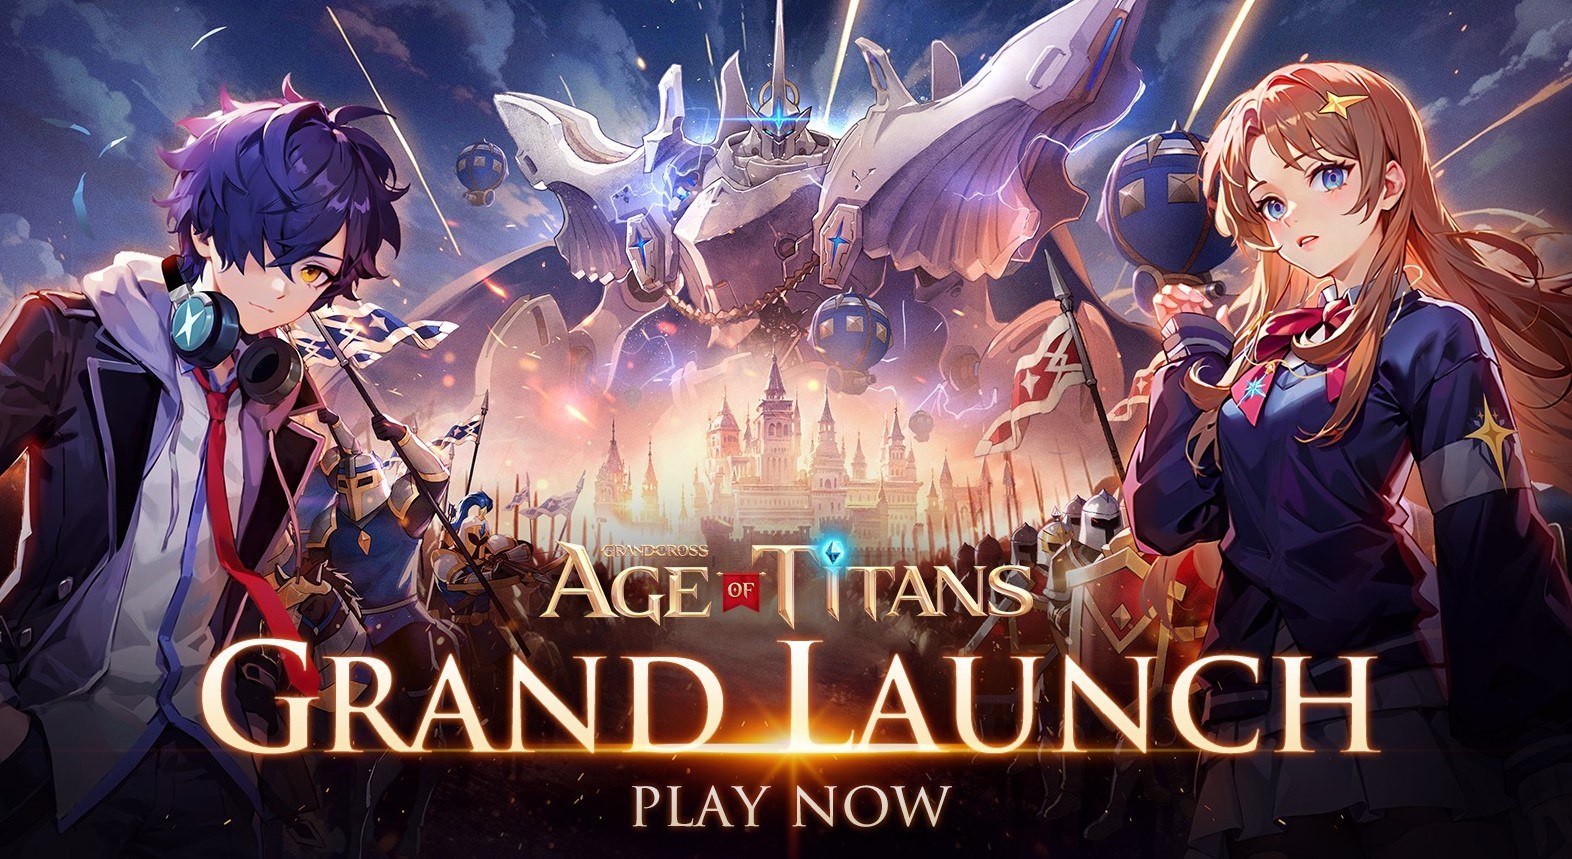 GRAND CROSS : Age of Titans Tips and Tricks for Fast Progression